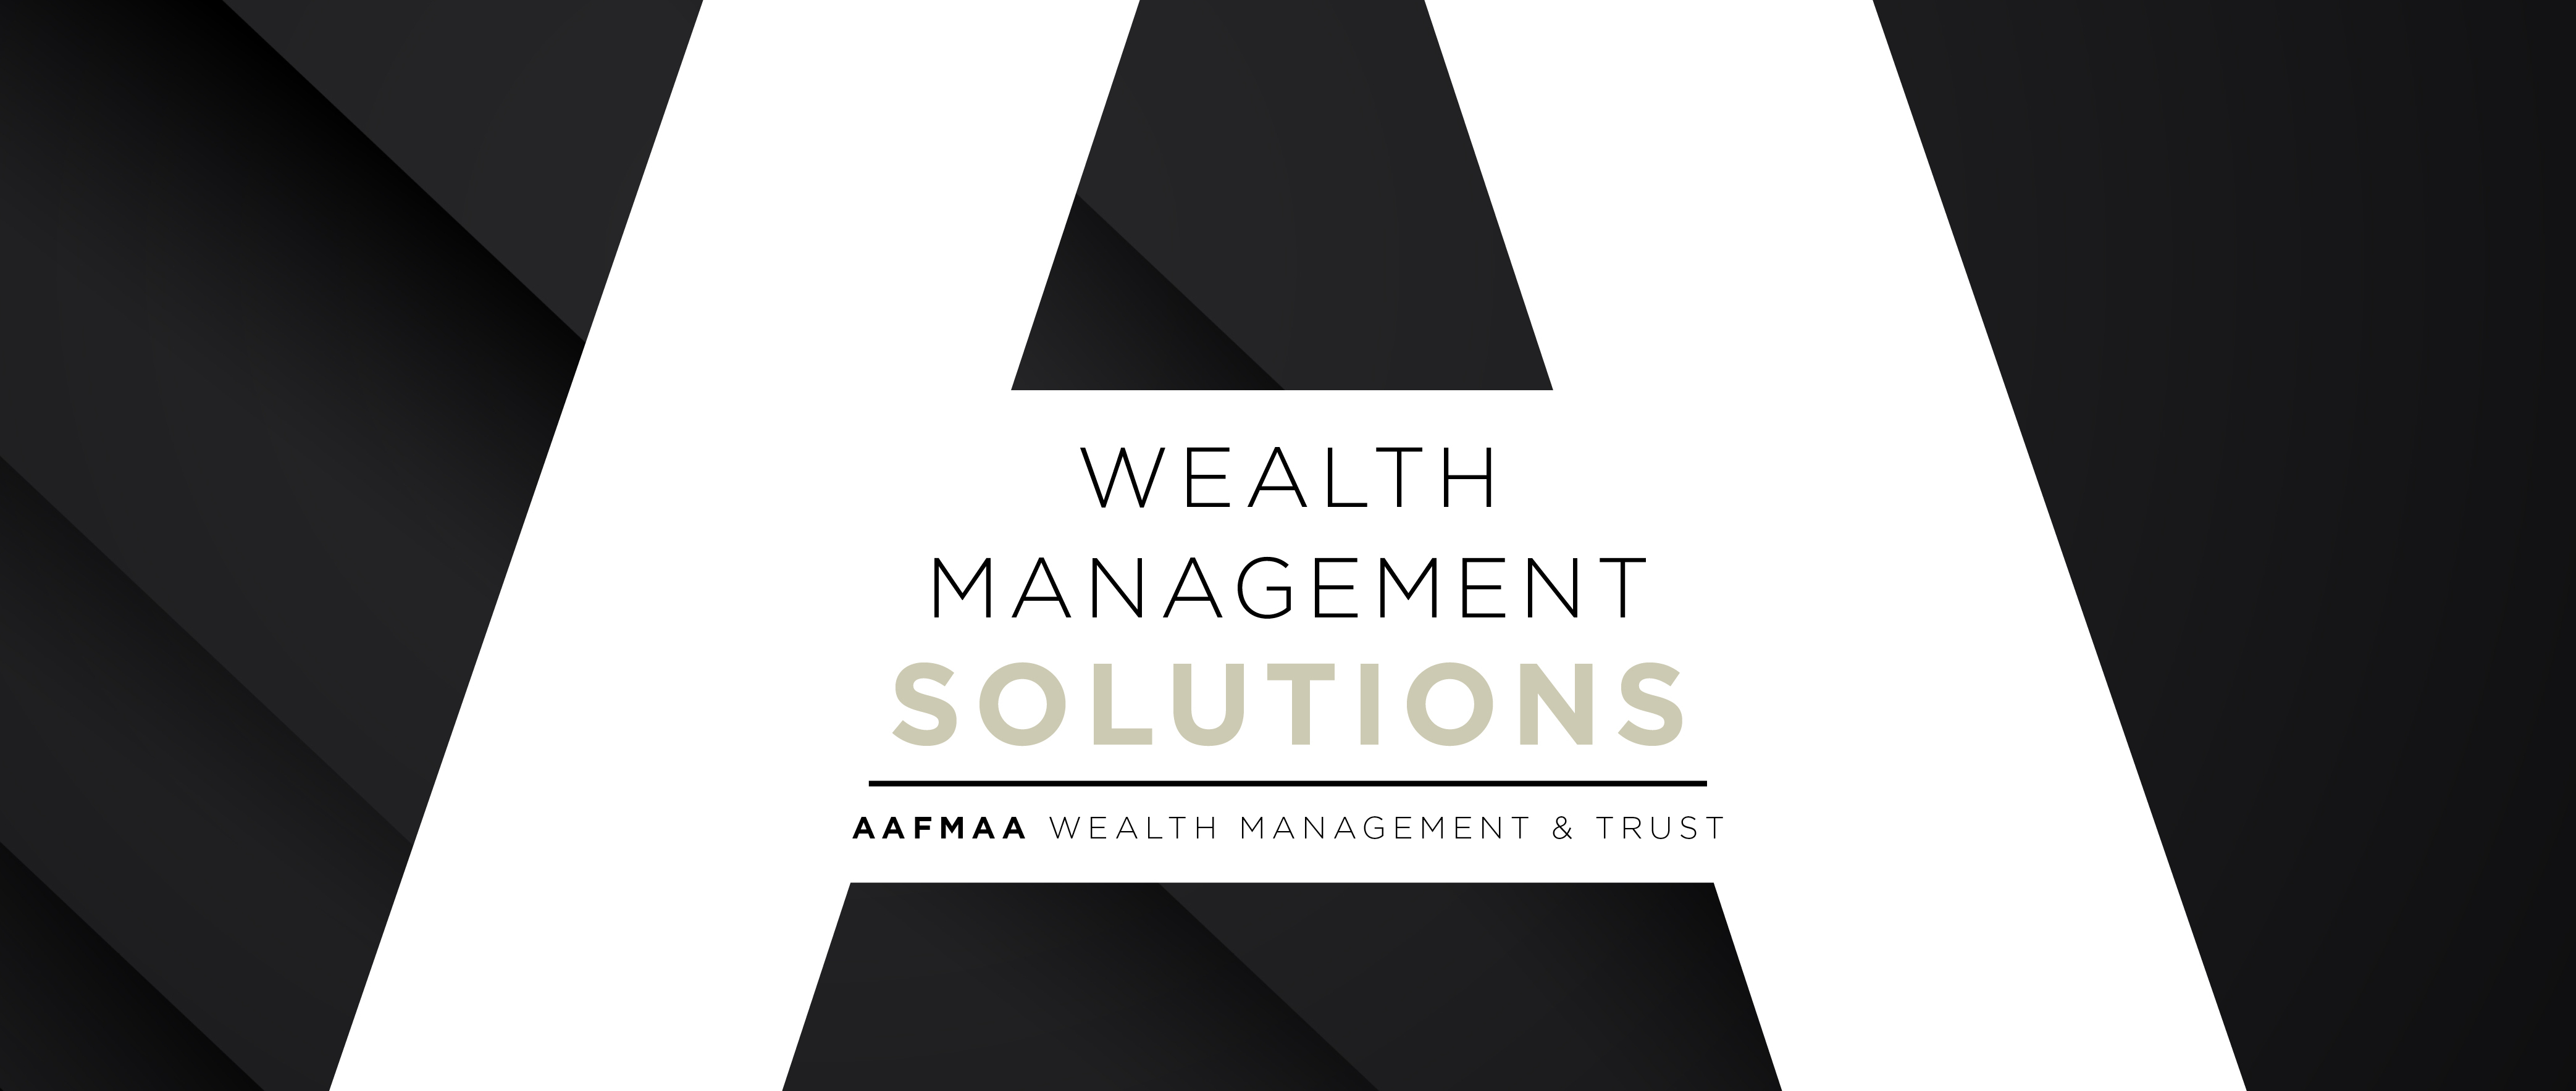 Wealth Management Solutions.